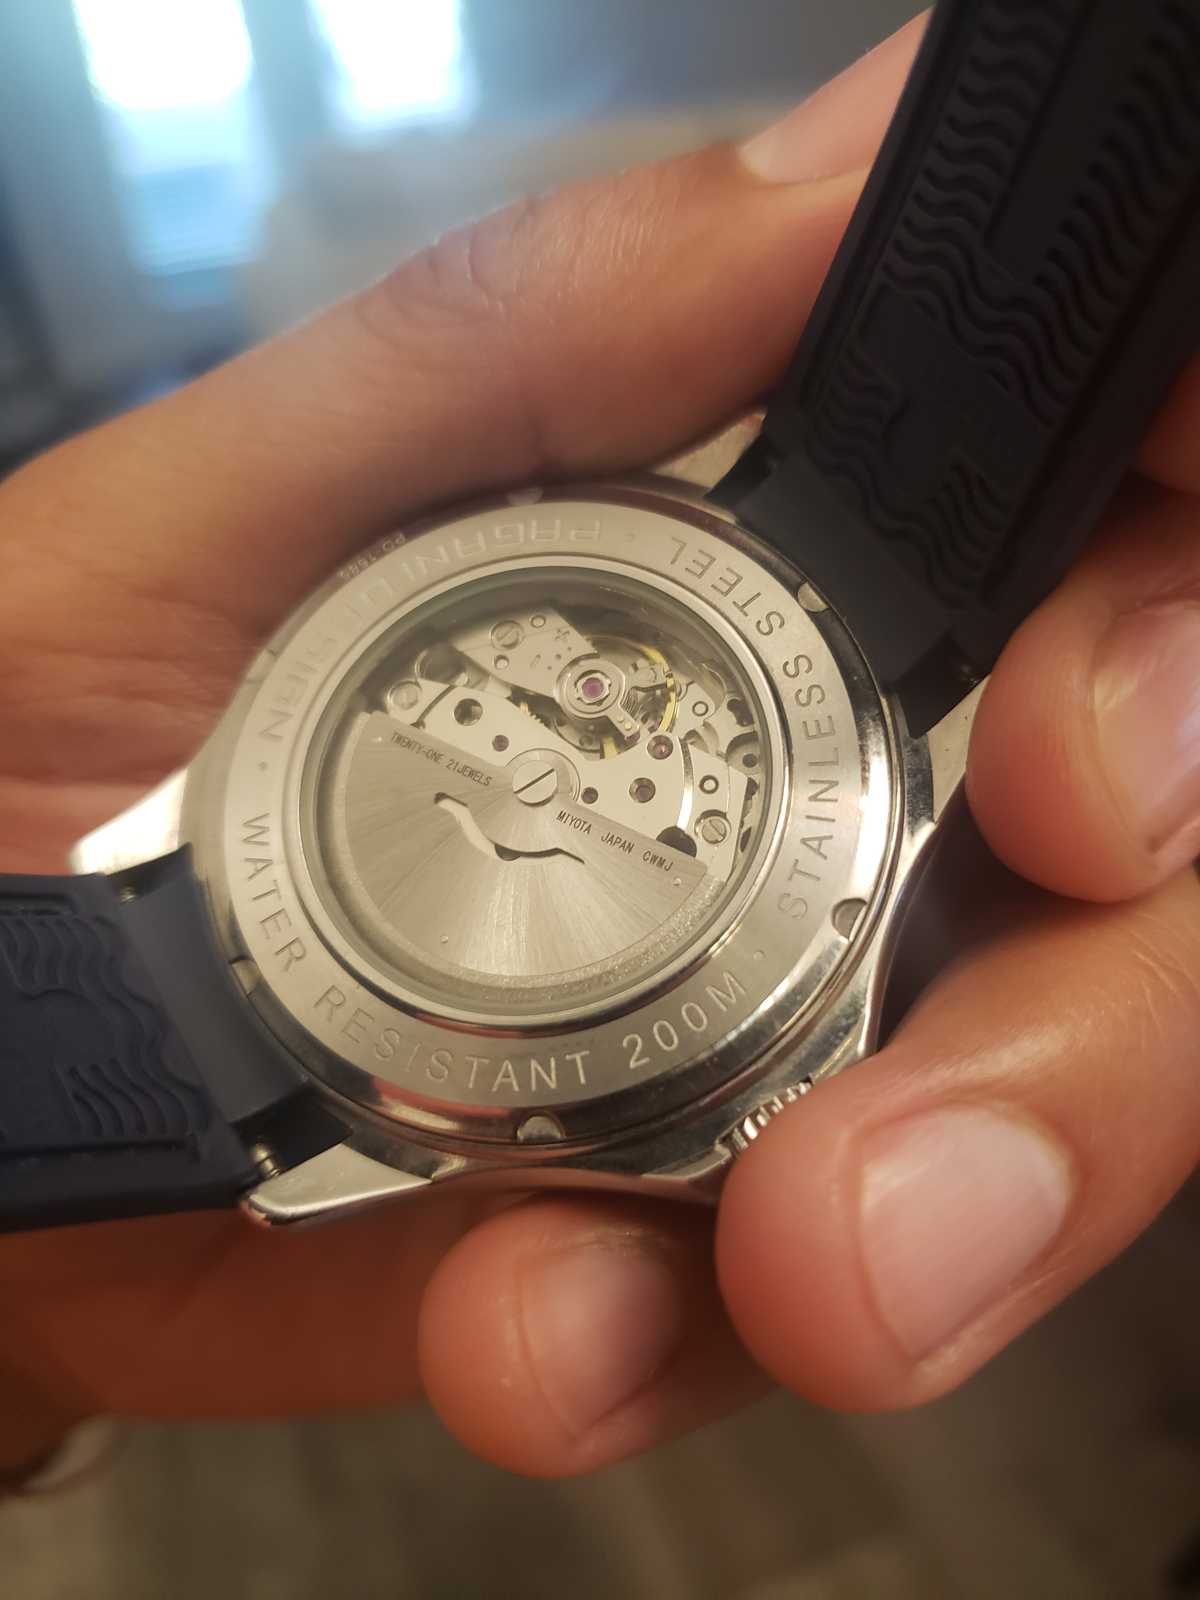 Pagani Design Review and Reality Check - Watch Complications